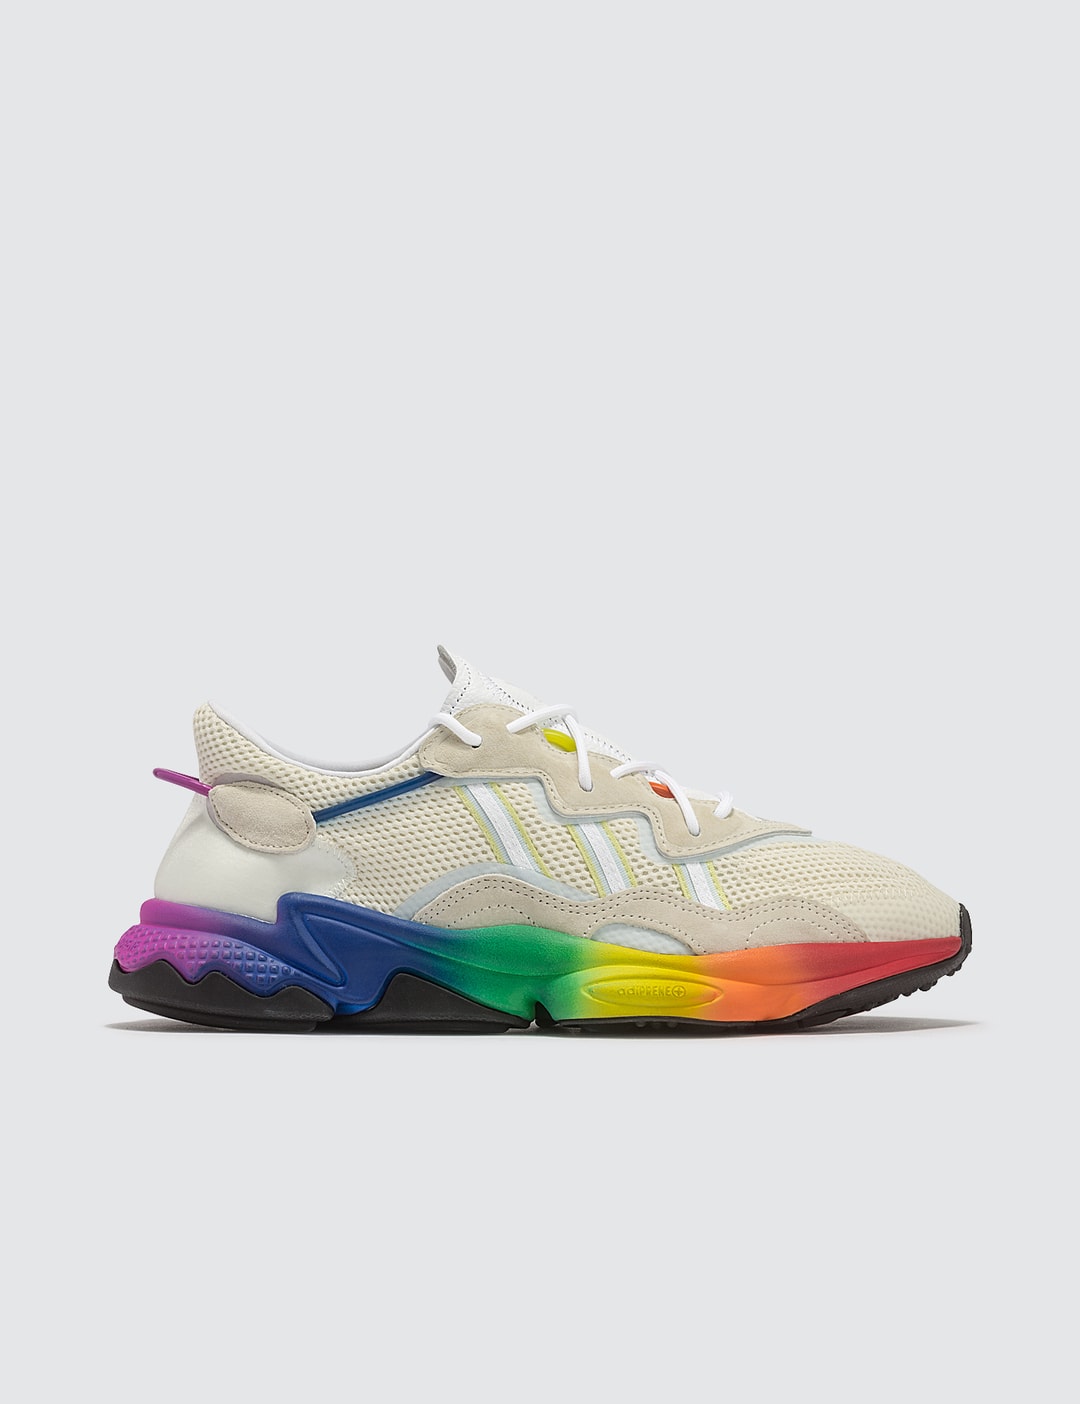 finish motto Passive Adidas Originals - Ozweego Pride | HBX - Globally Curated Fashion and  Lifestyle by Hypebeast